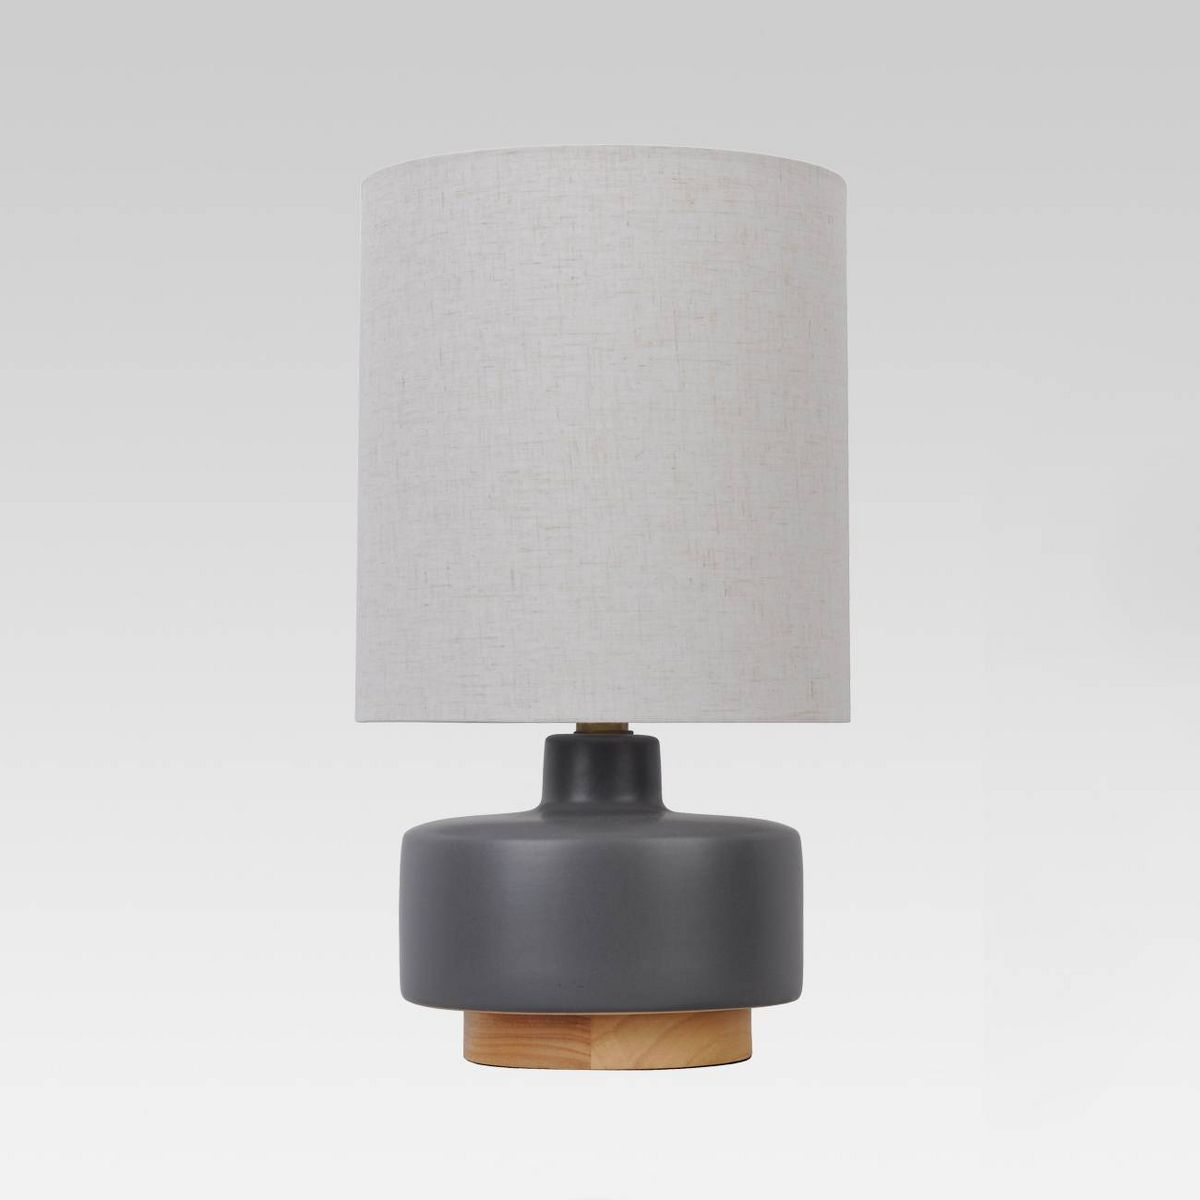 Ceramic Table Lamp with Wood Base - Threshold™ | Target